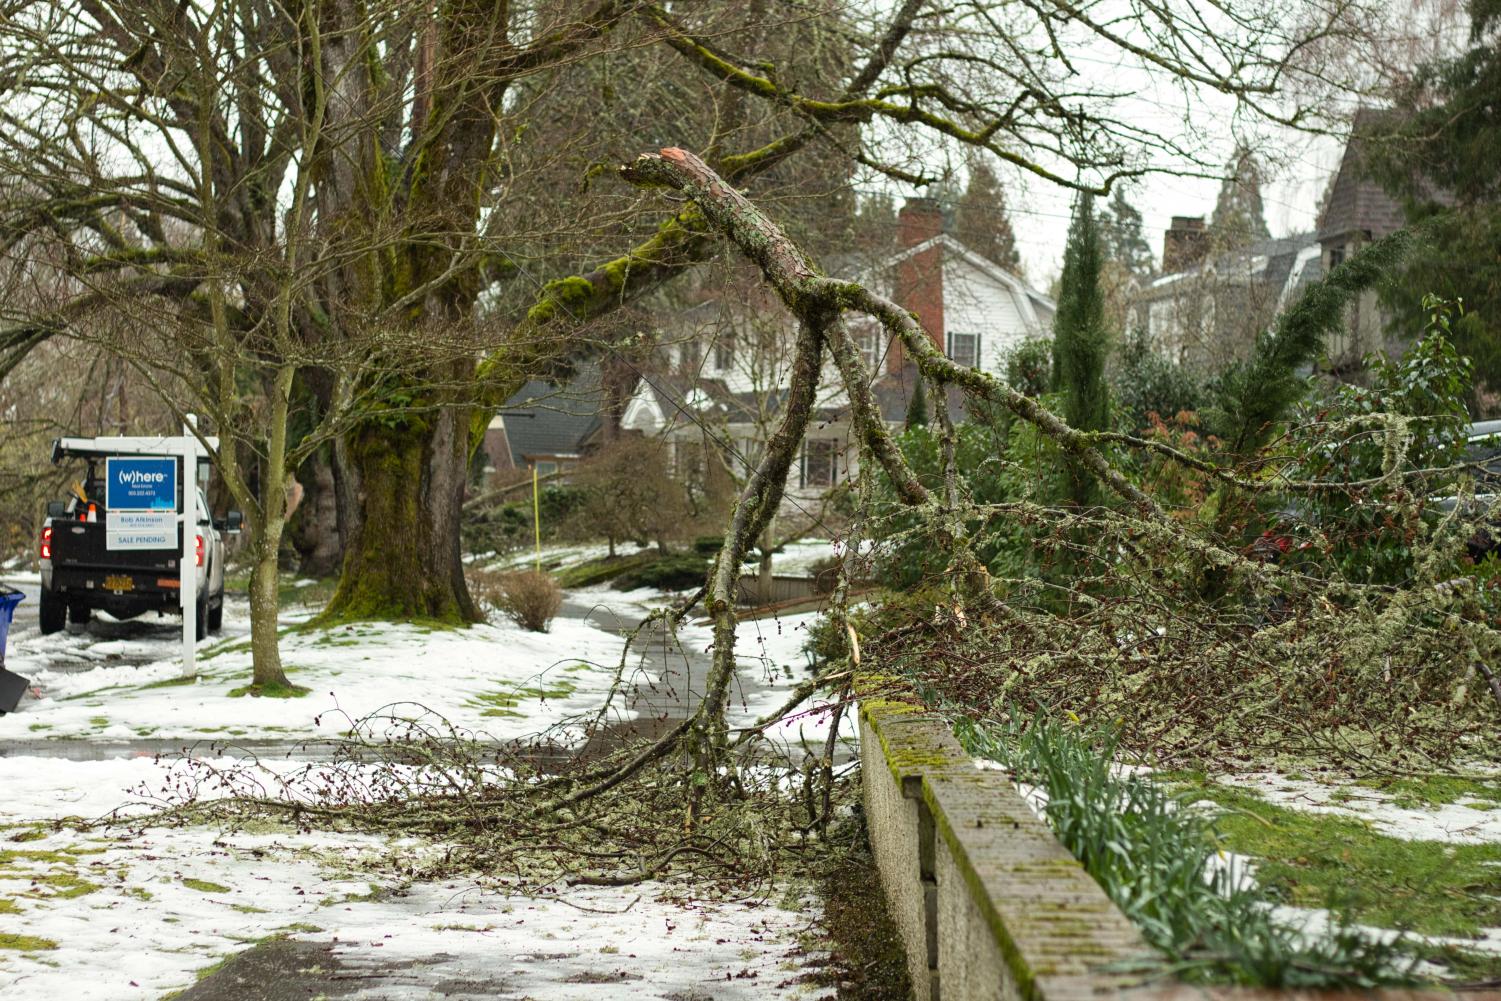 Portland+Ice+Storm+Topples+Trees+and+Powerlines%2C+Causing+Mass+Power+Outages+for+La+Salle+Students